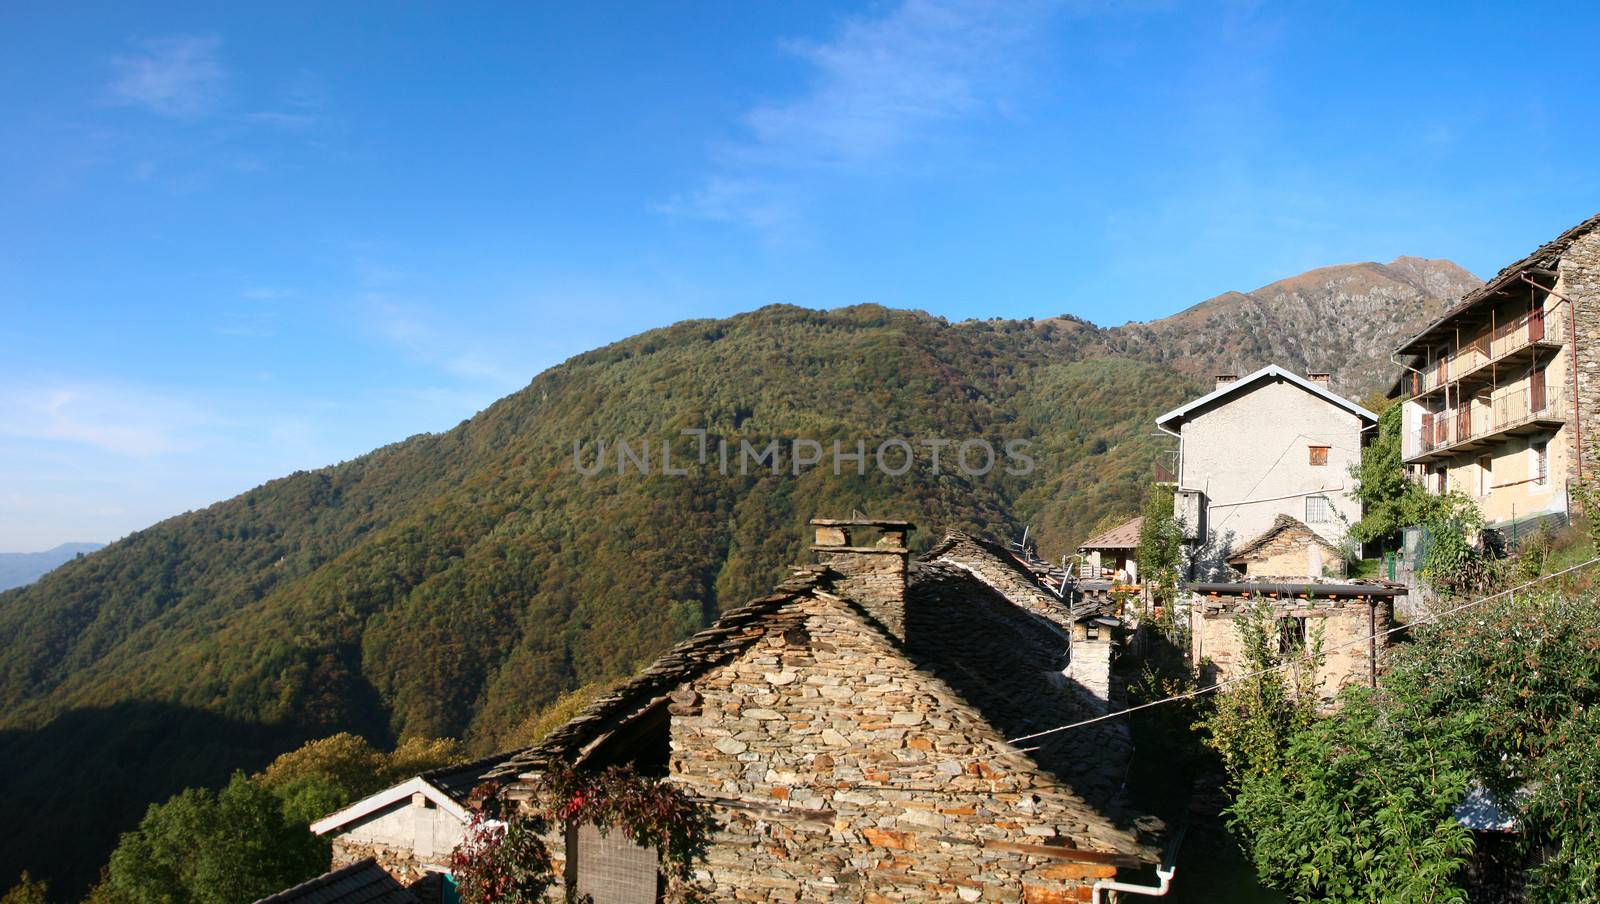 scareno - small village in the mountain of Italy